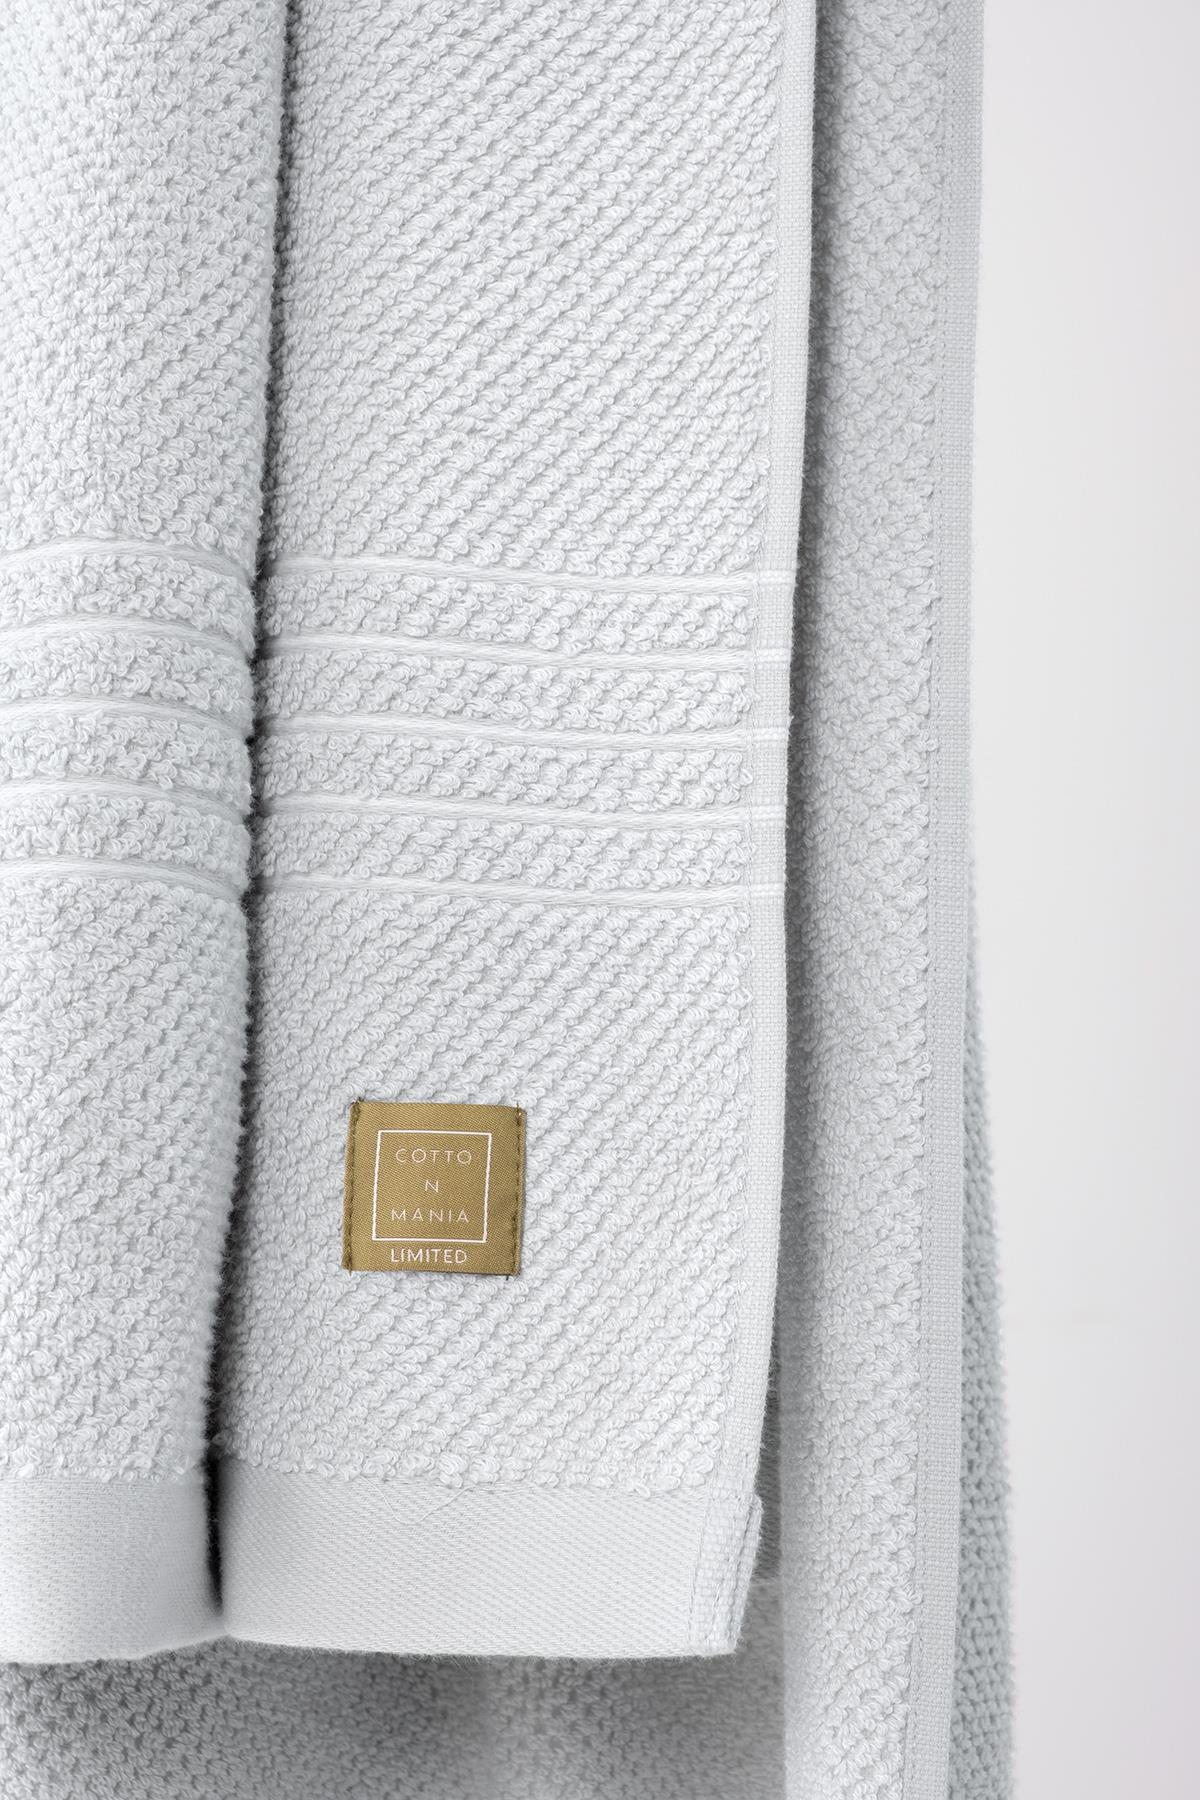 Flate No: 2 – Oversize Limited, Extra Large Extra Wide Oversize Towel